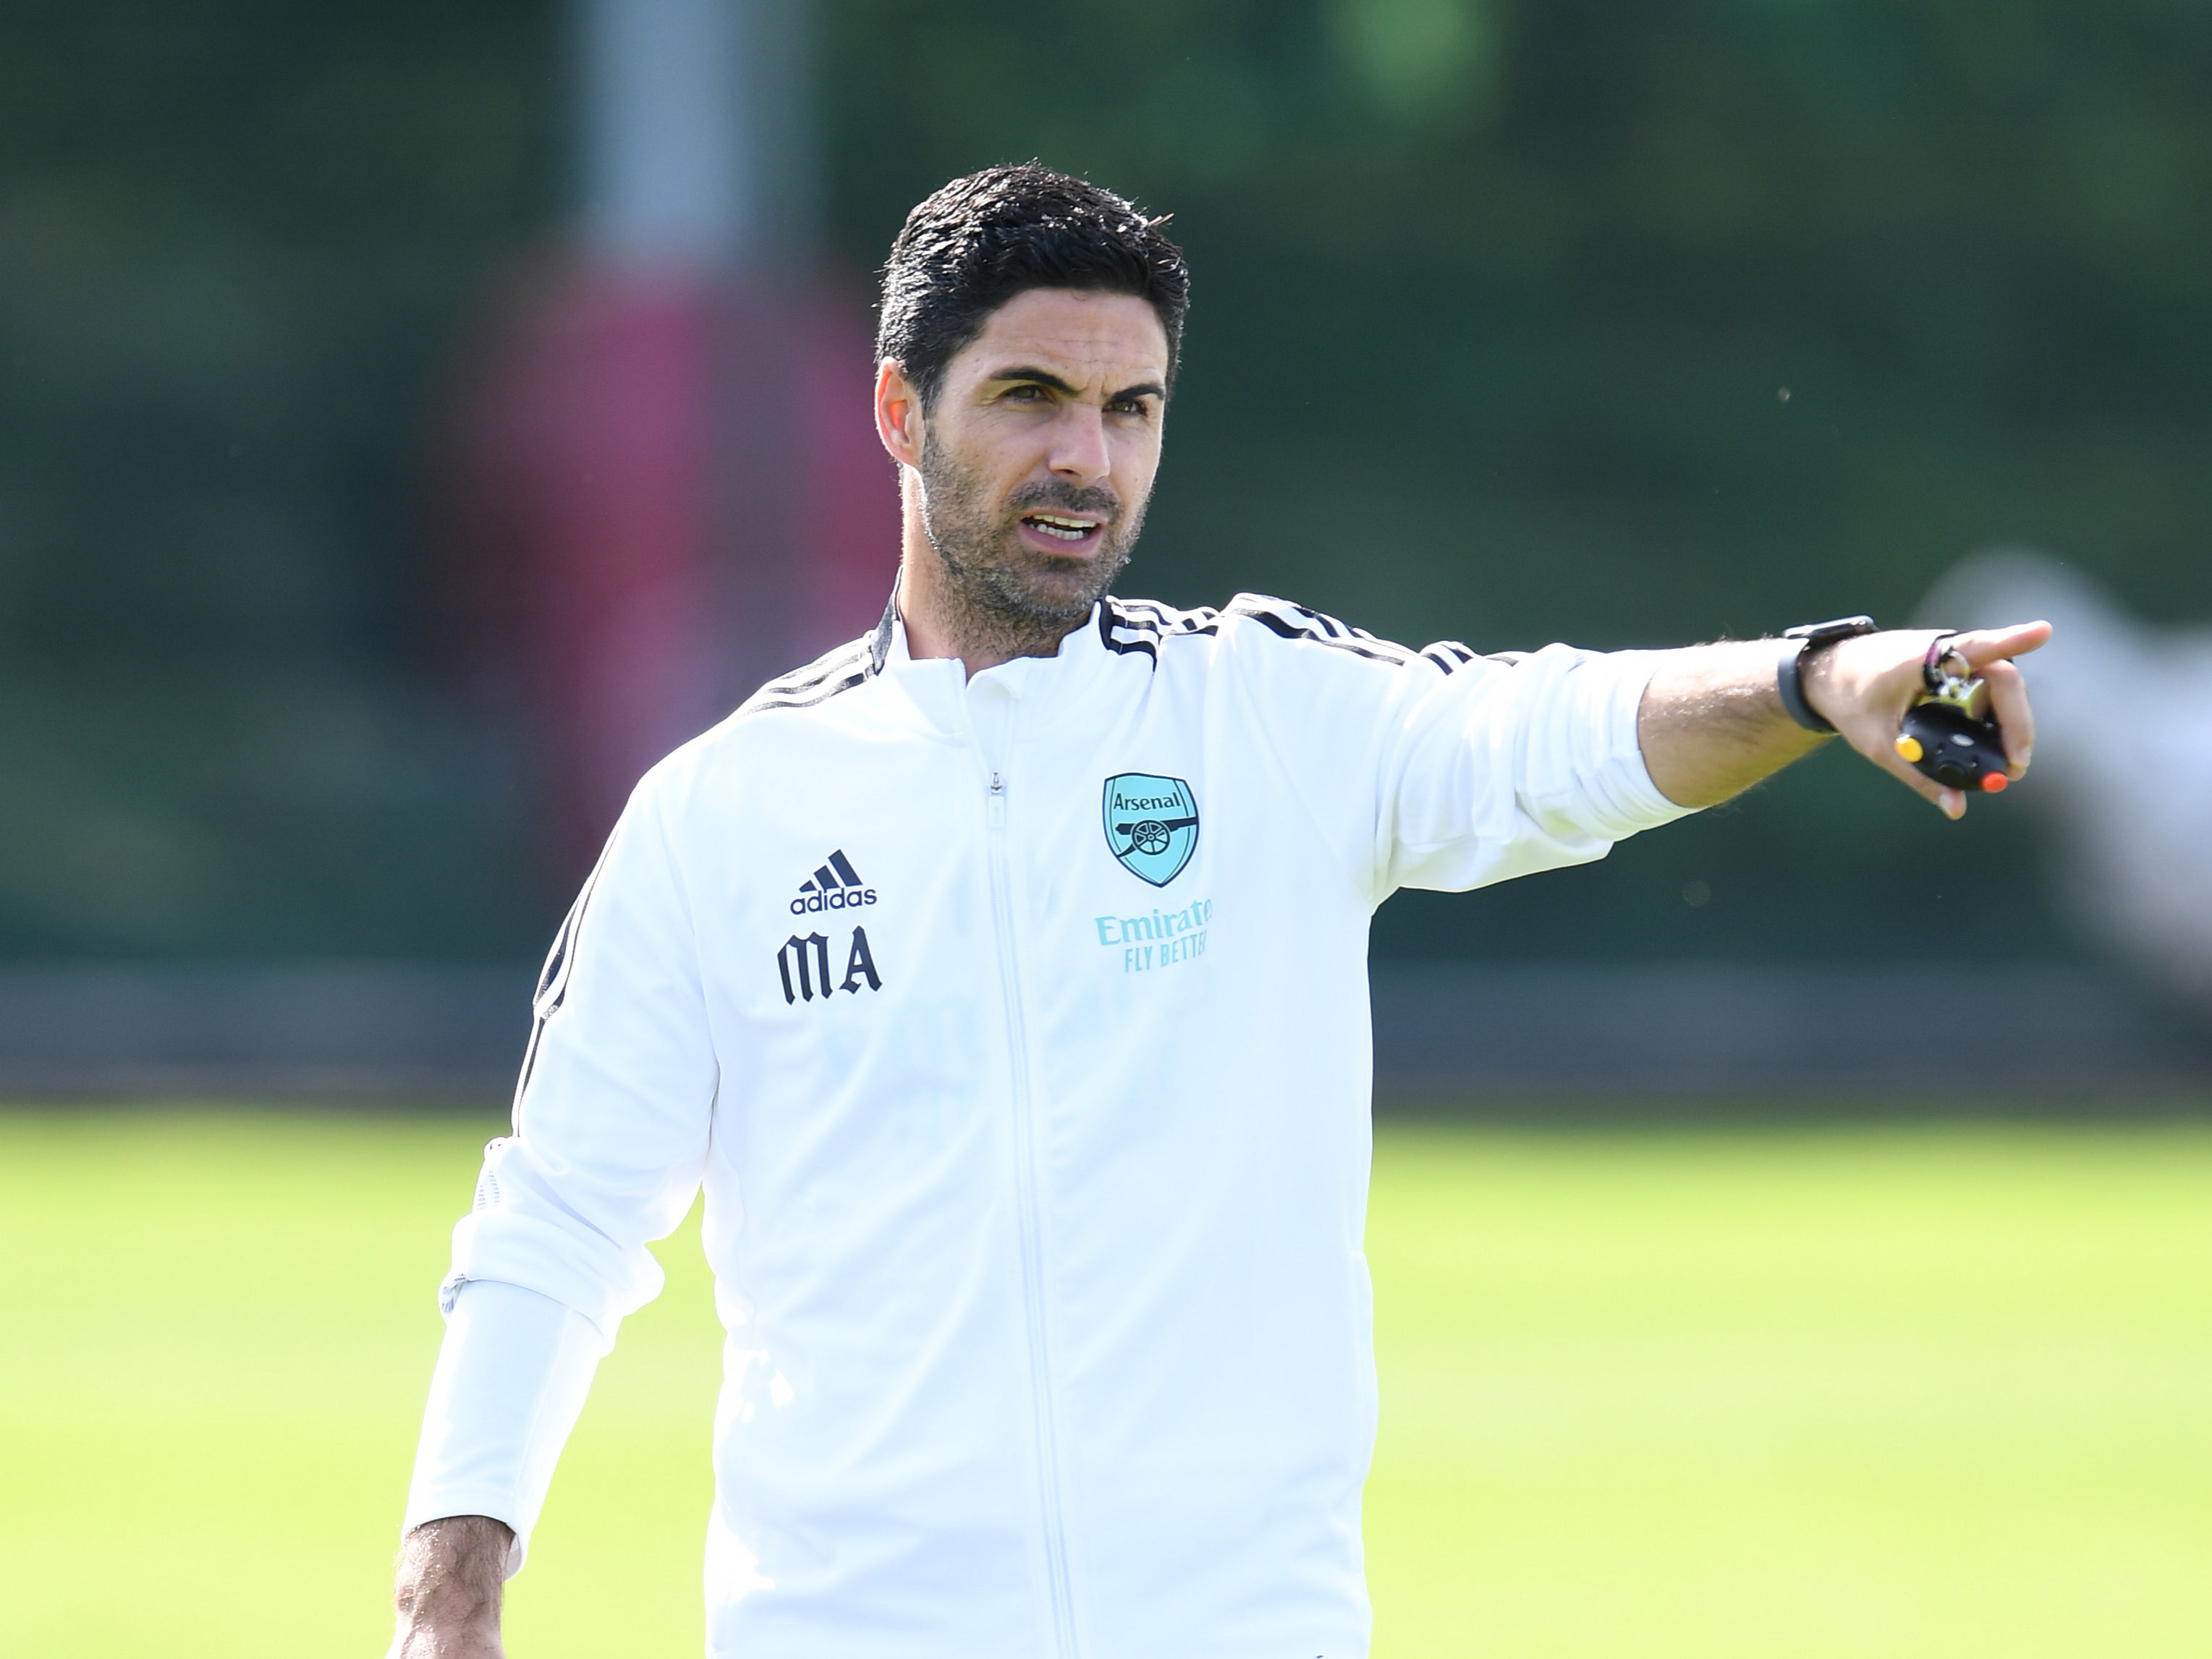 The intensity of Mikel Arteta’s training sessions has been questioned